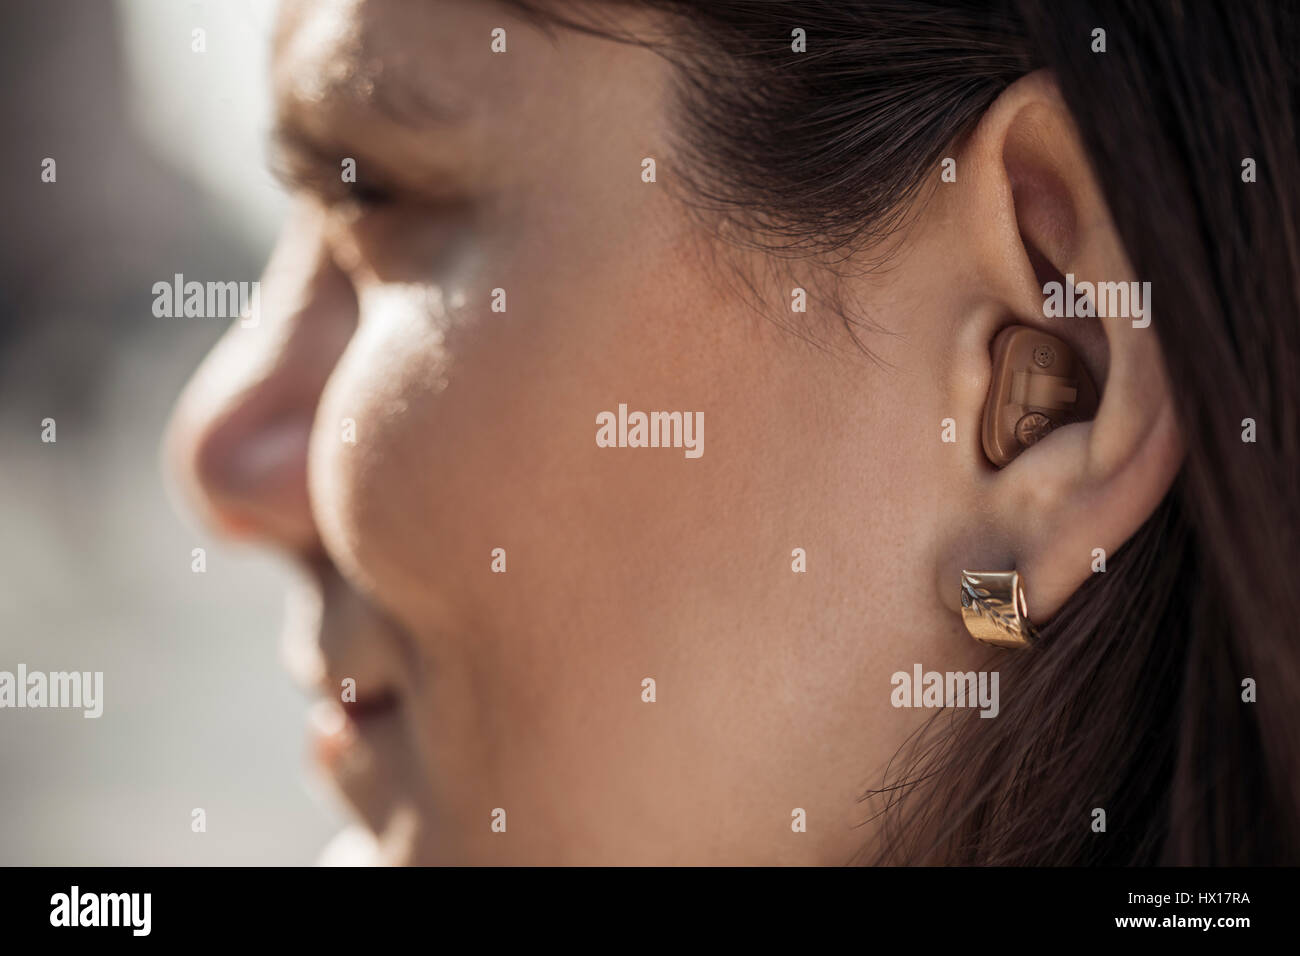 Young woman with hearing aid, close-up Stock Photo